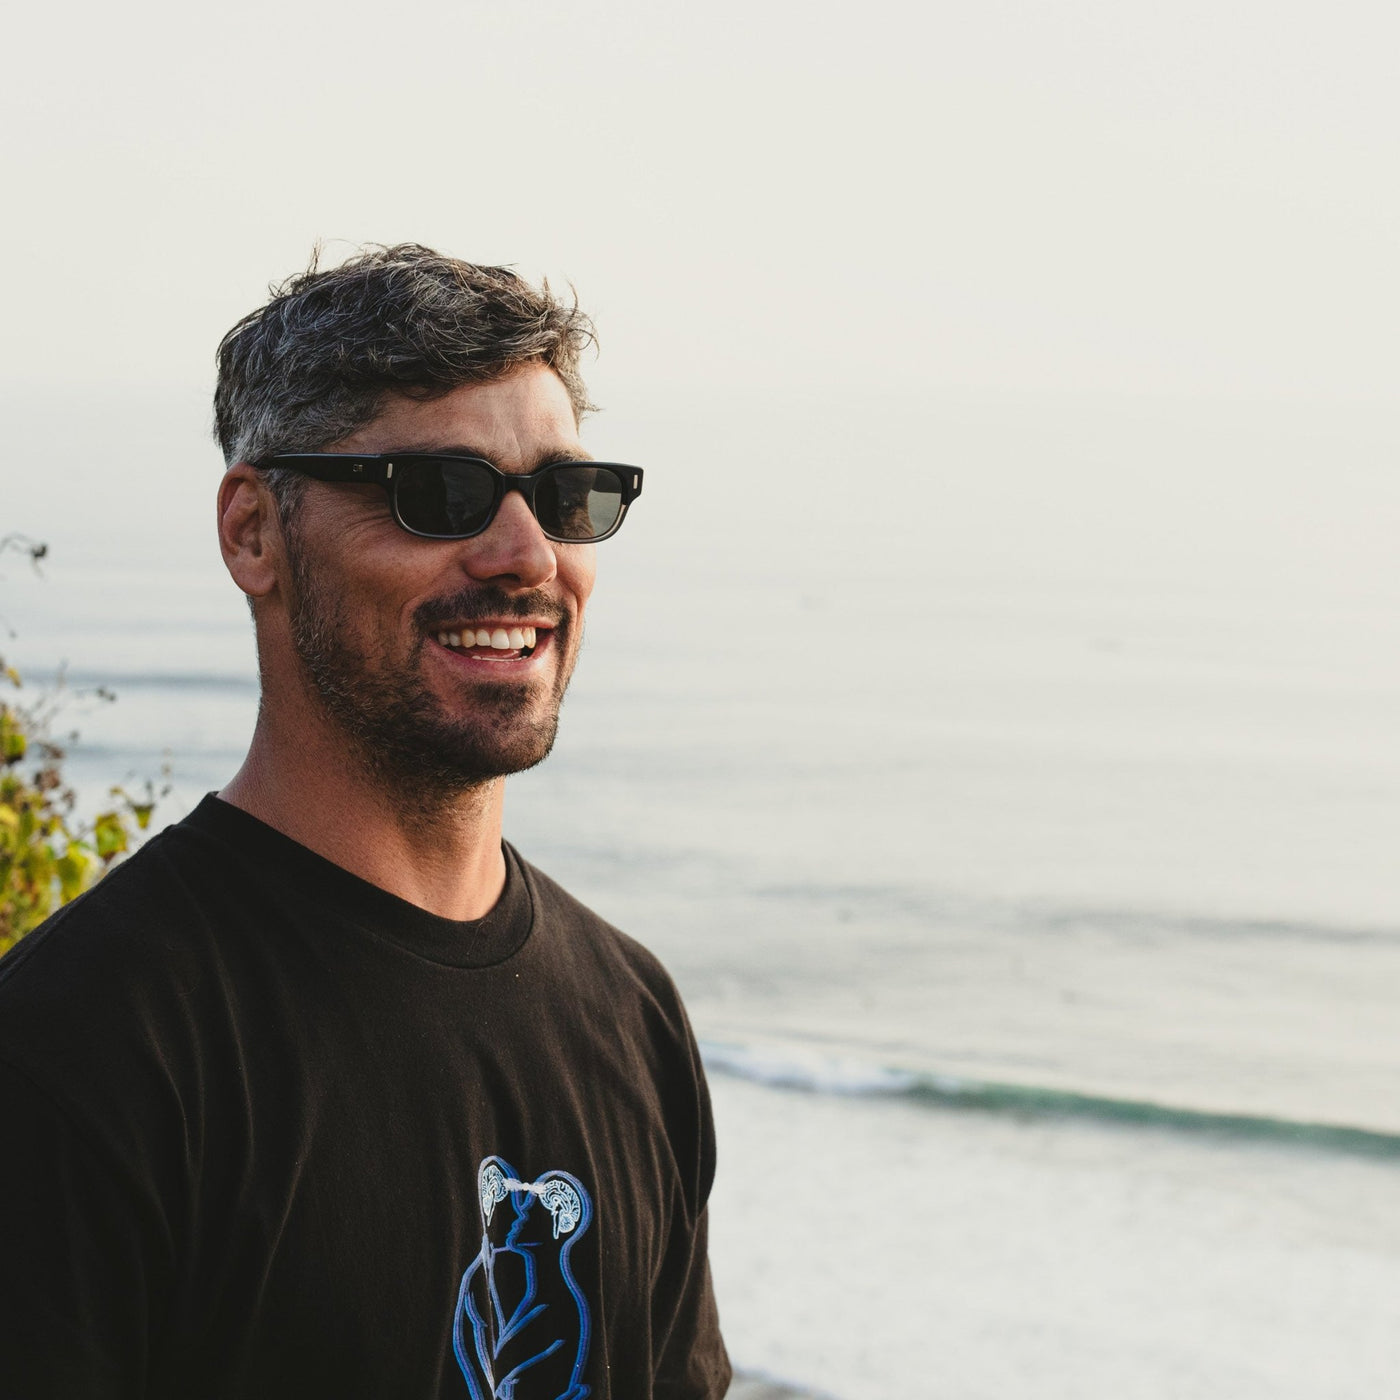 Jay Davies wearing surf sunglasses looking out at the ocean in Bali and smiling